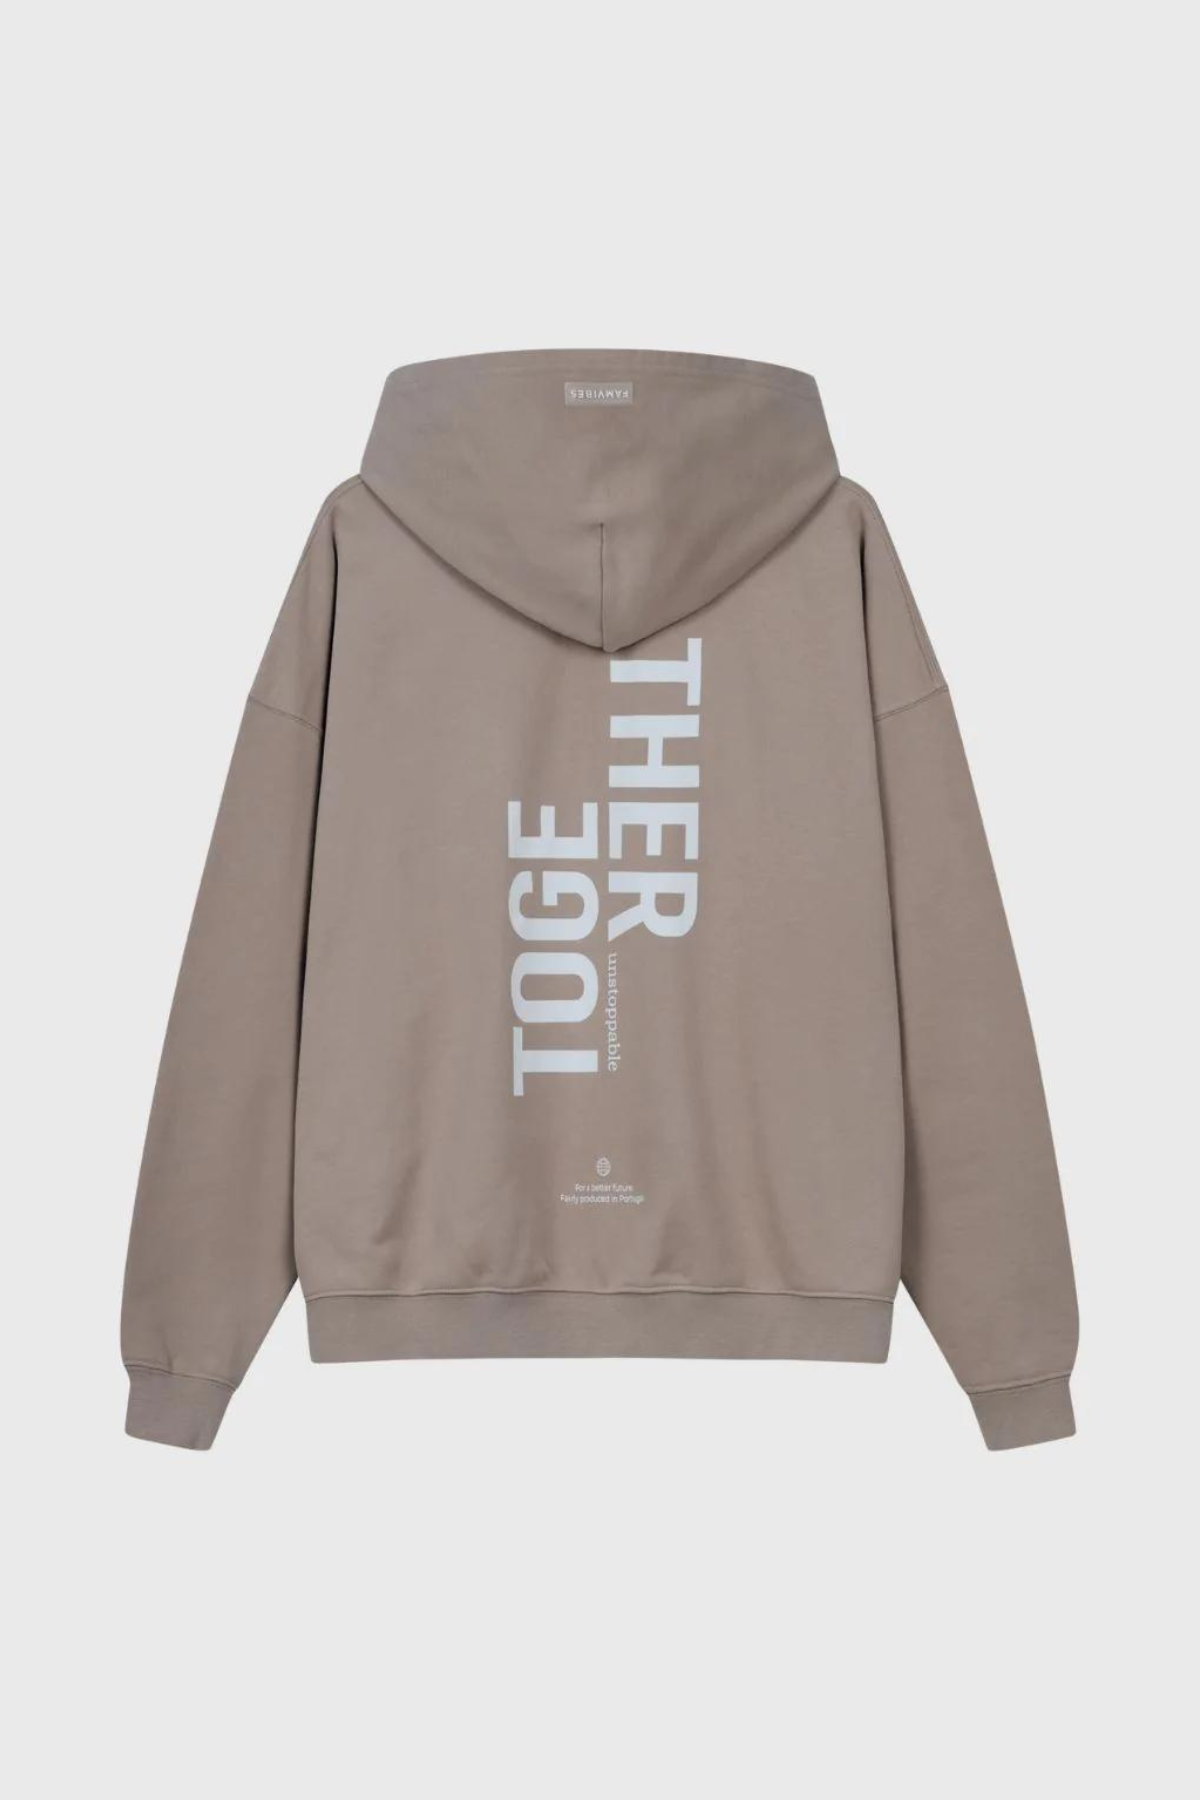 Hoodie "Together" | Unisex - SYNCSON 